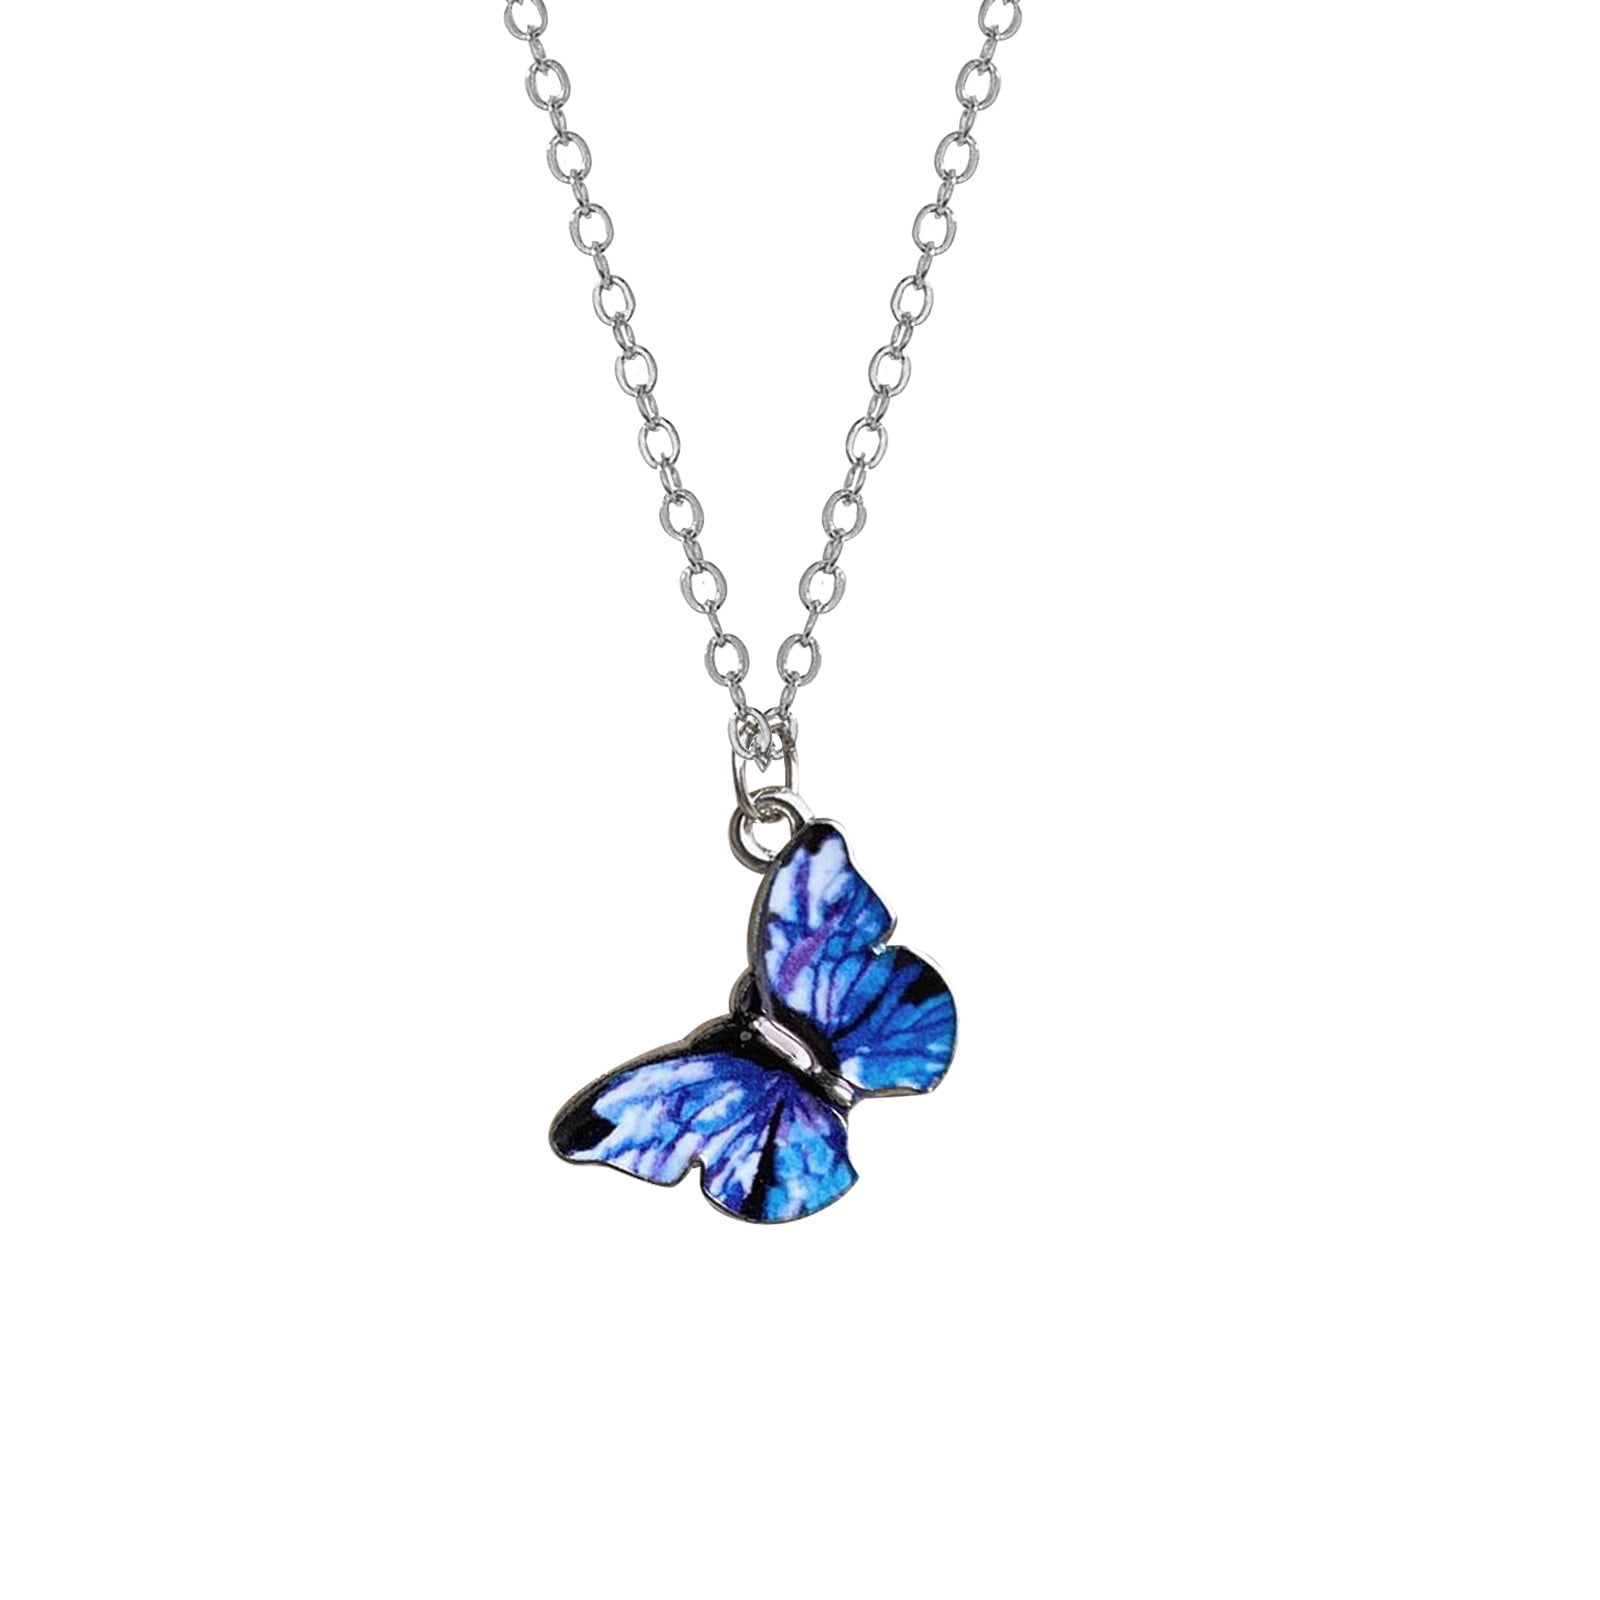 AJIWYH Elegant Butterfly Shape Pendant Necklace Fashion Clavicle Chain ...